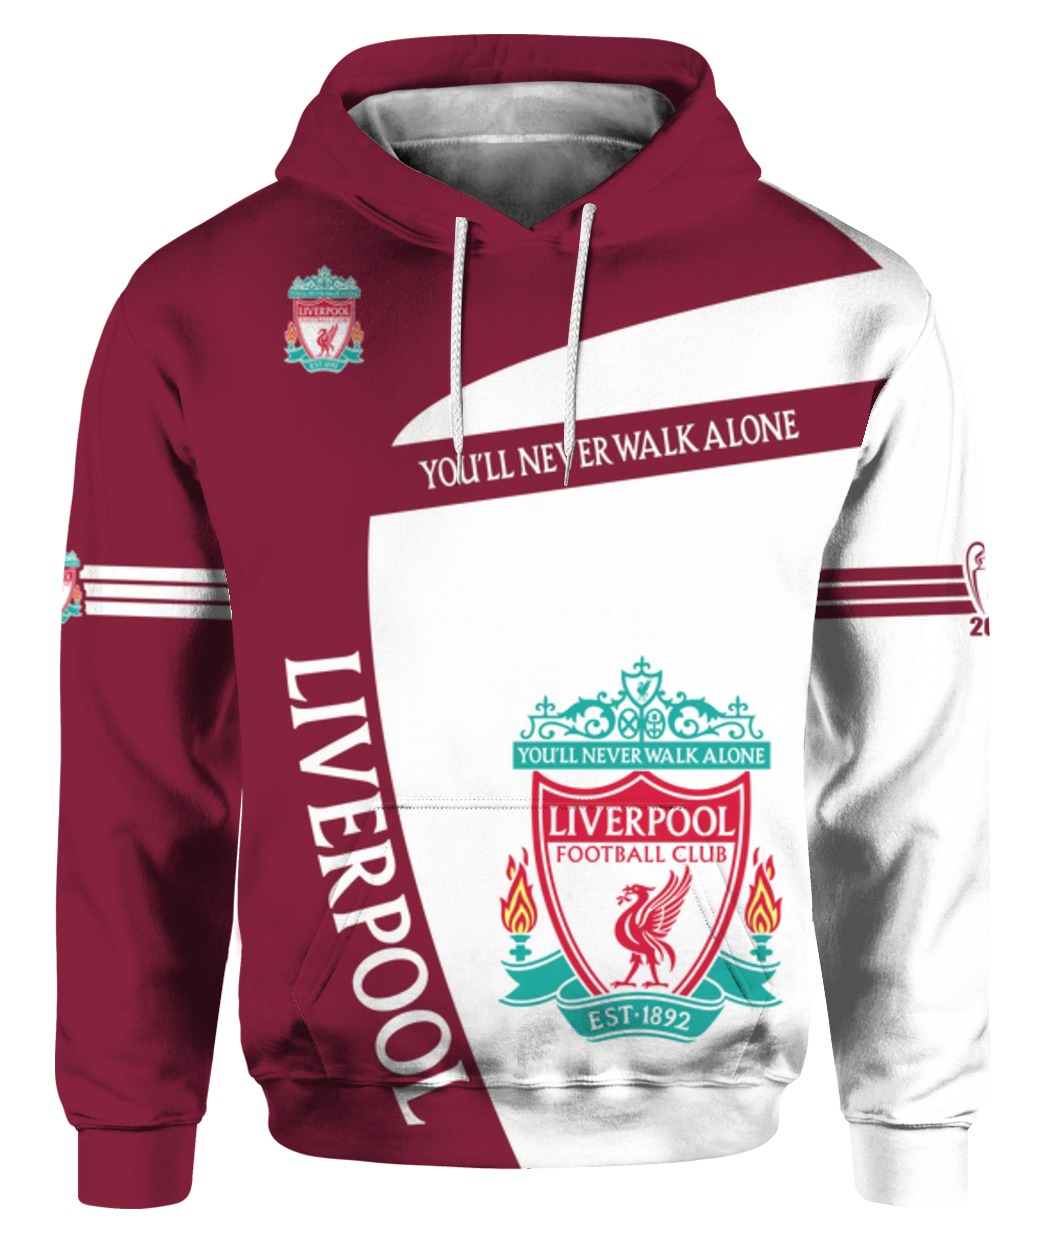 You'll never walk alone liverpool football club all over print hoodie - front